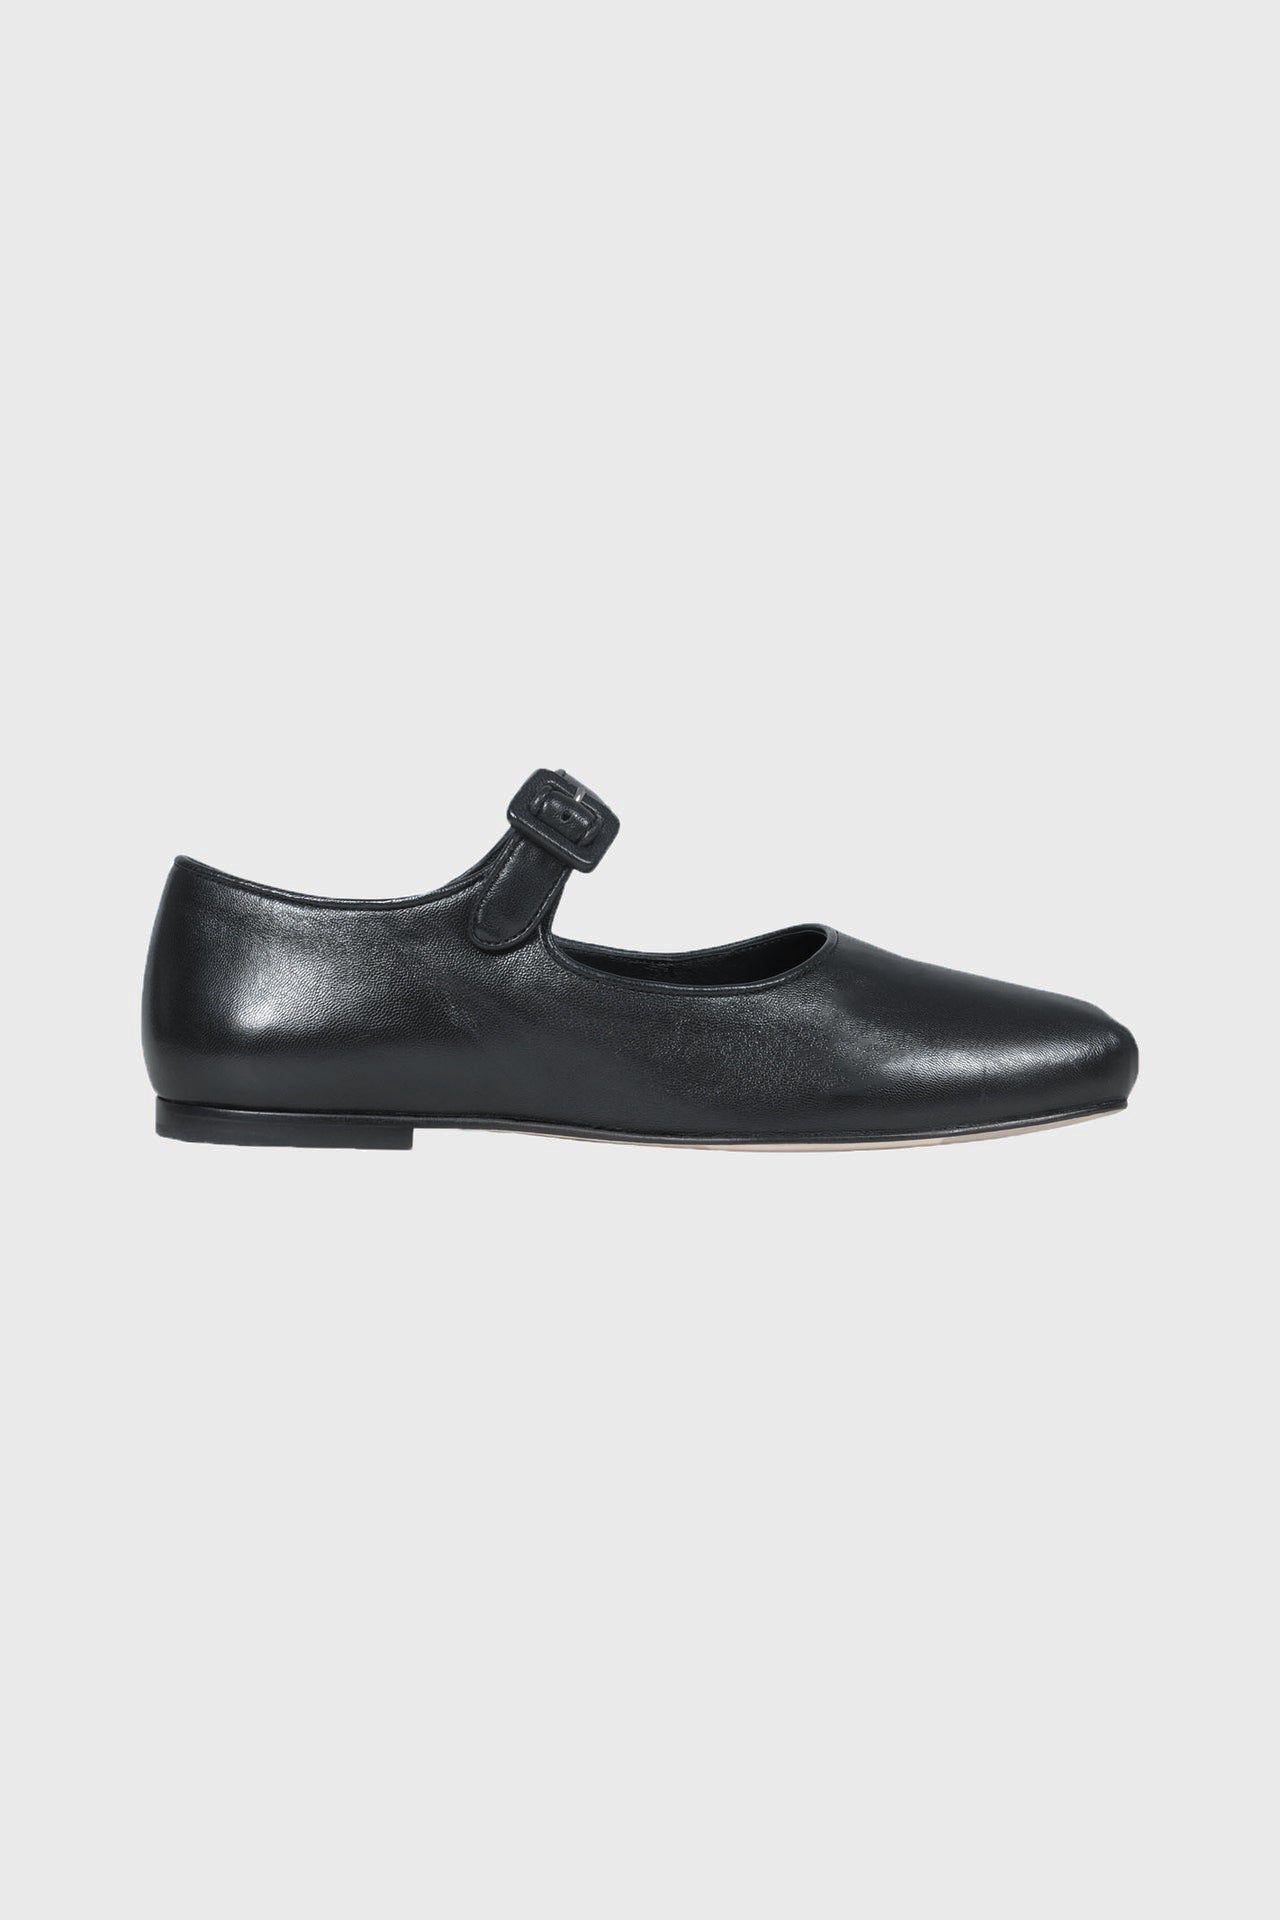 Mary Jane Pointe in Black Nappa Leather